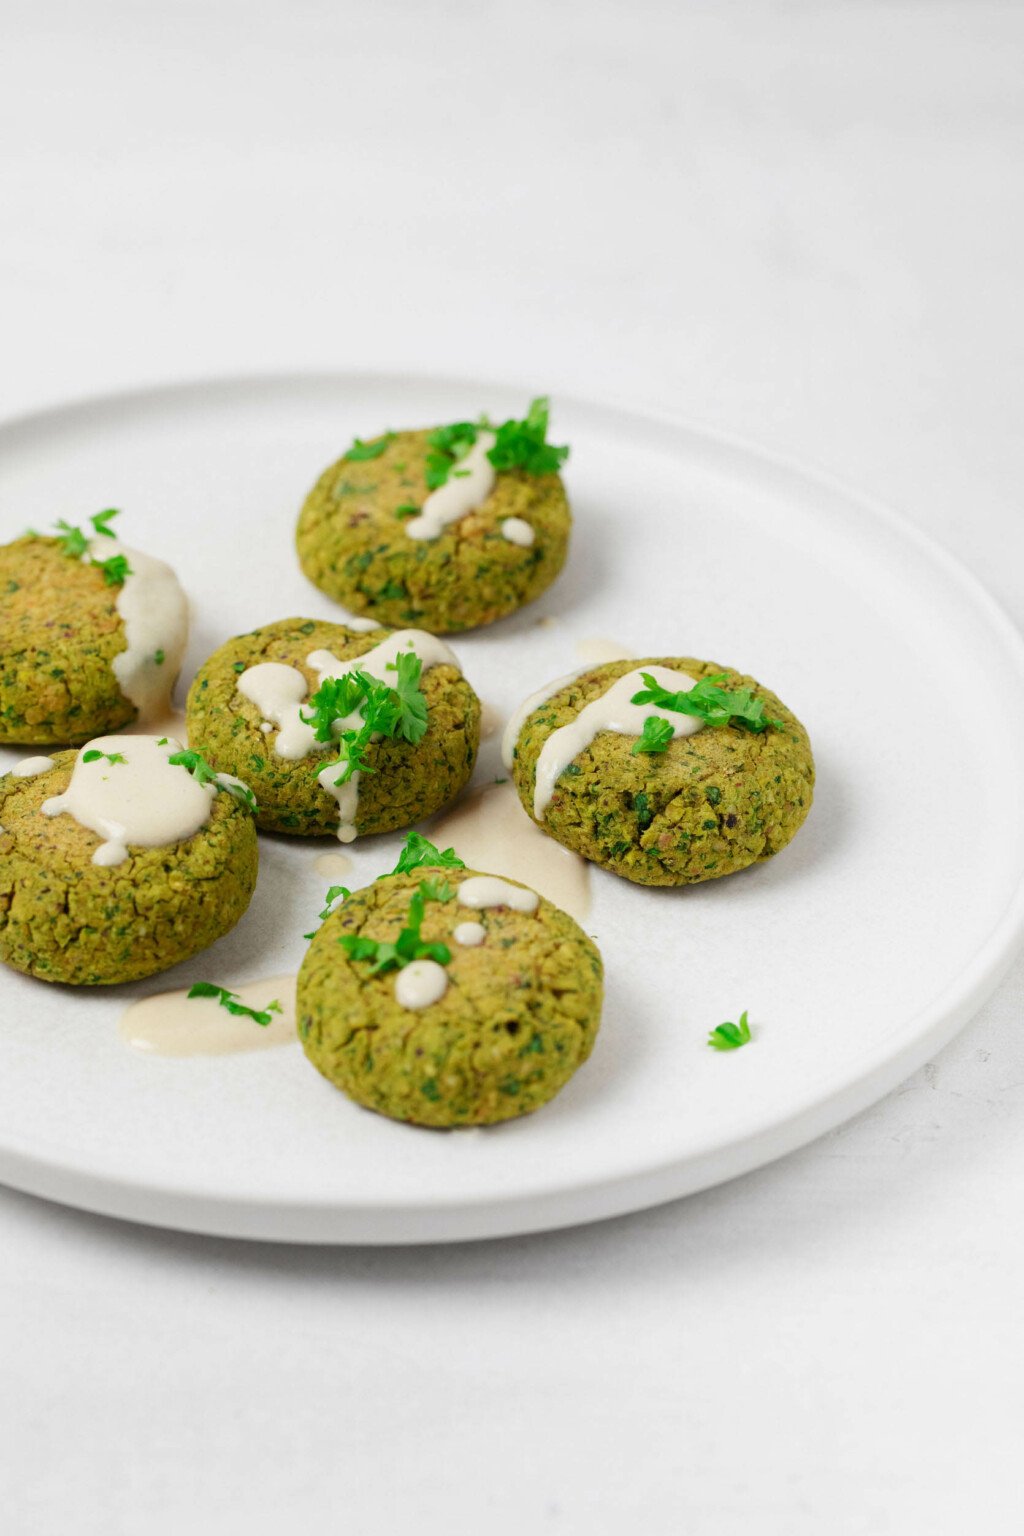 Baked patties of chickpeas, ground pistachios, and spinach have been arranged on a round, rimmed white plate. They're drizzled with a cream colored dressing and sprinkled with fresh herbs.